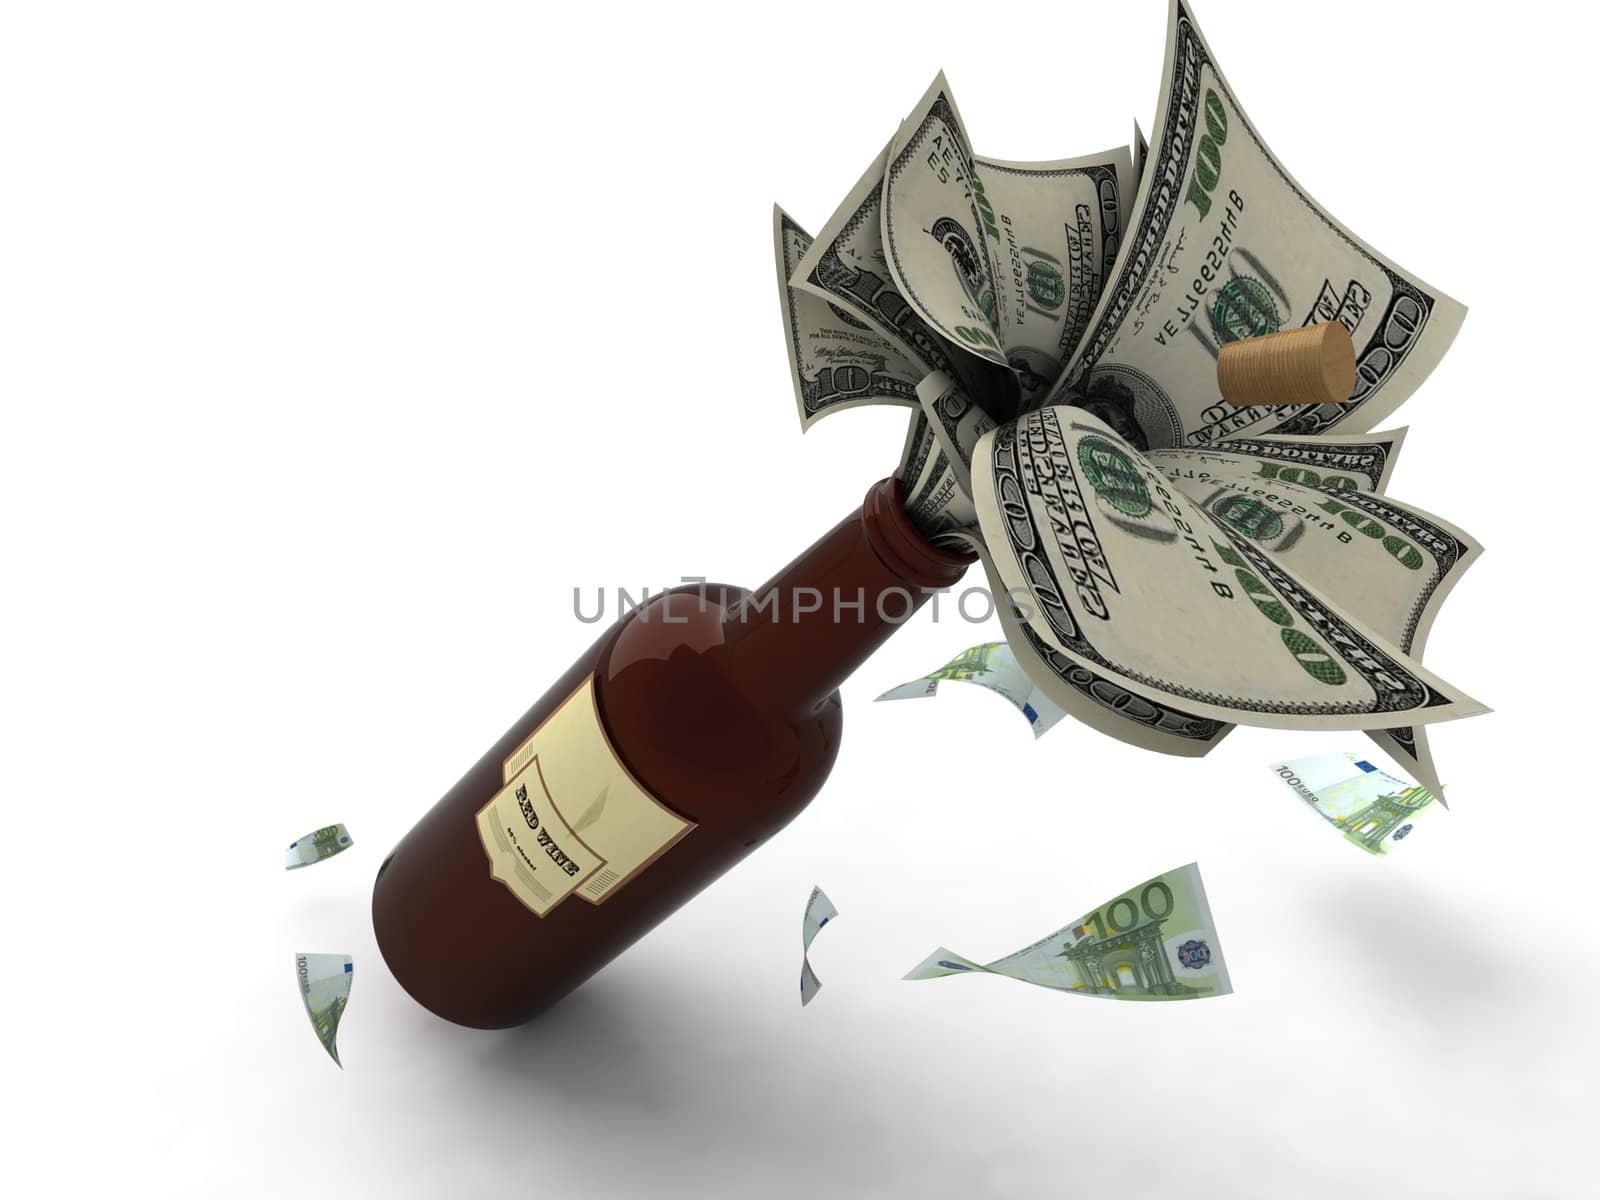 isolated three dimensional view of dollars in bottle

